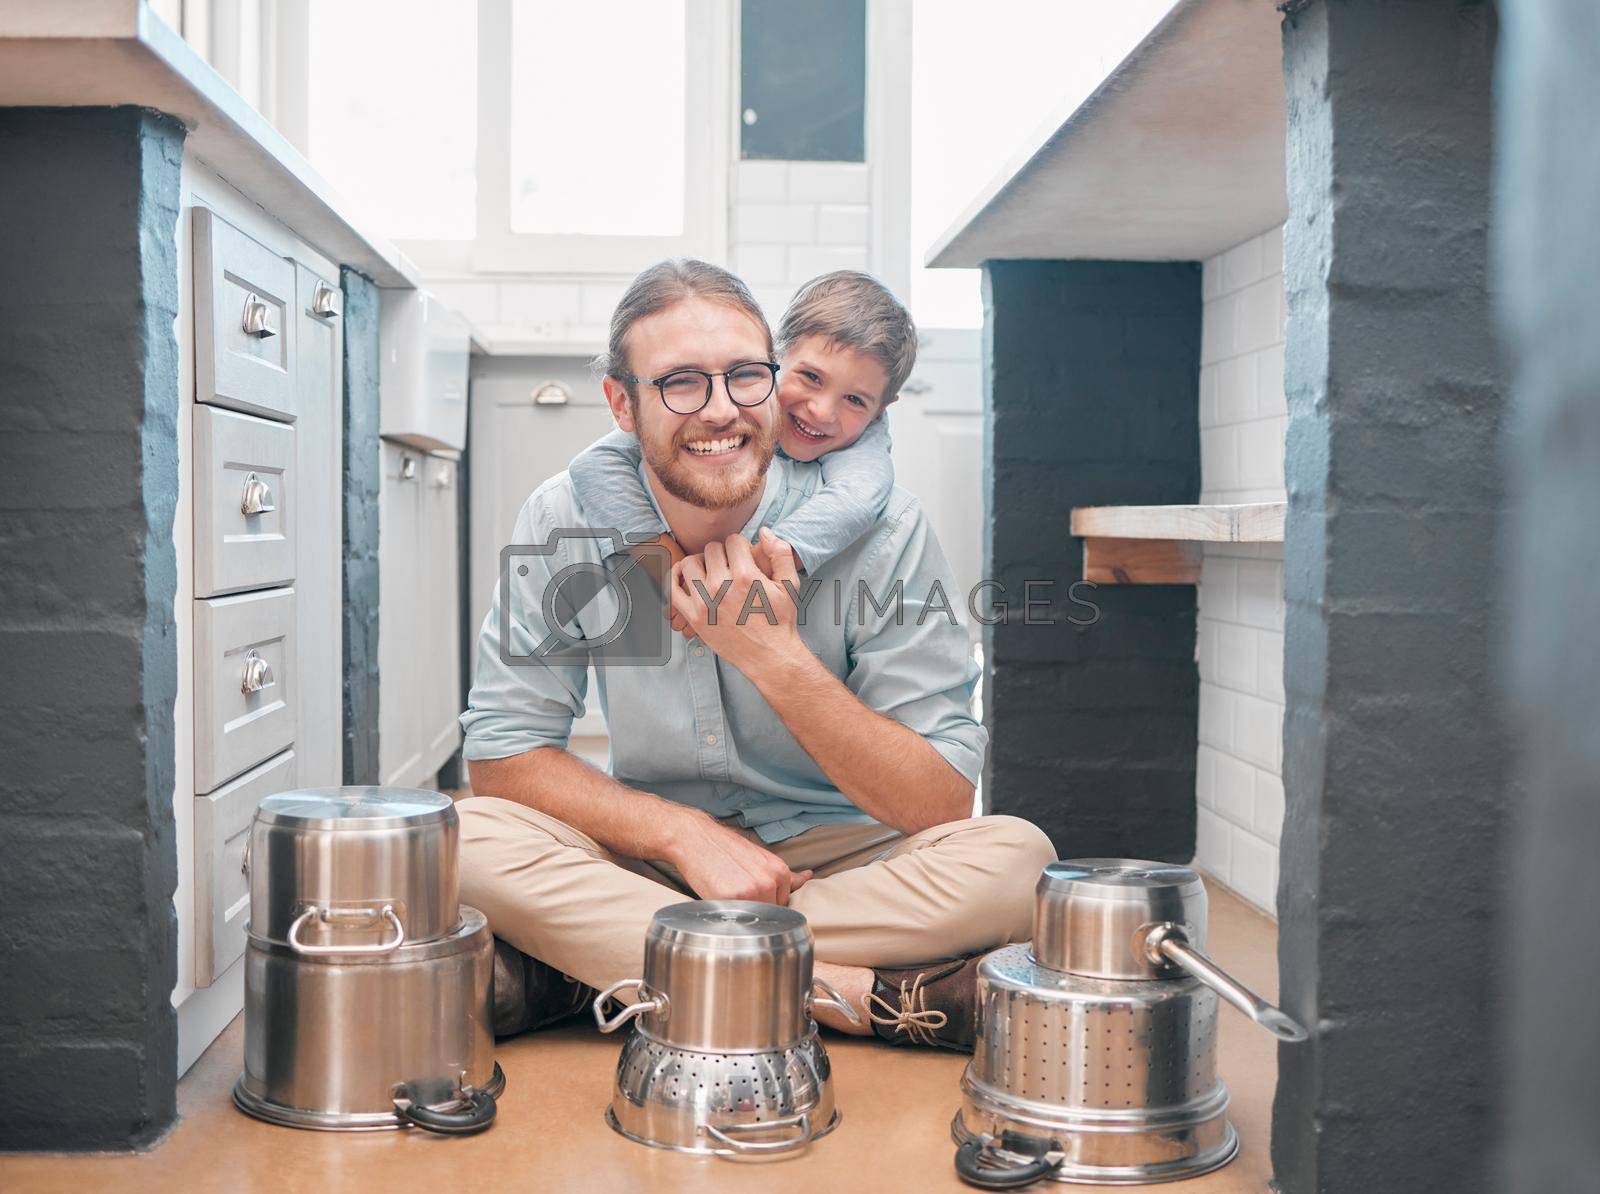 Shot of a father and son in the kitchen.